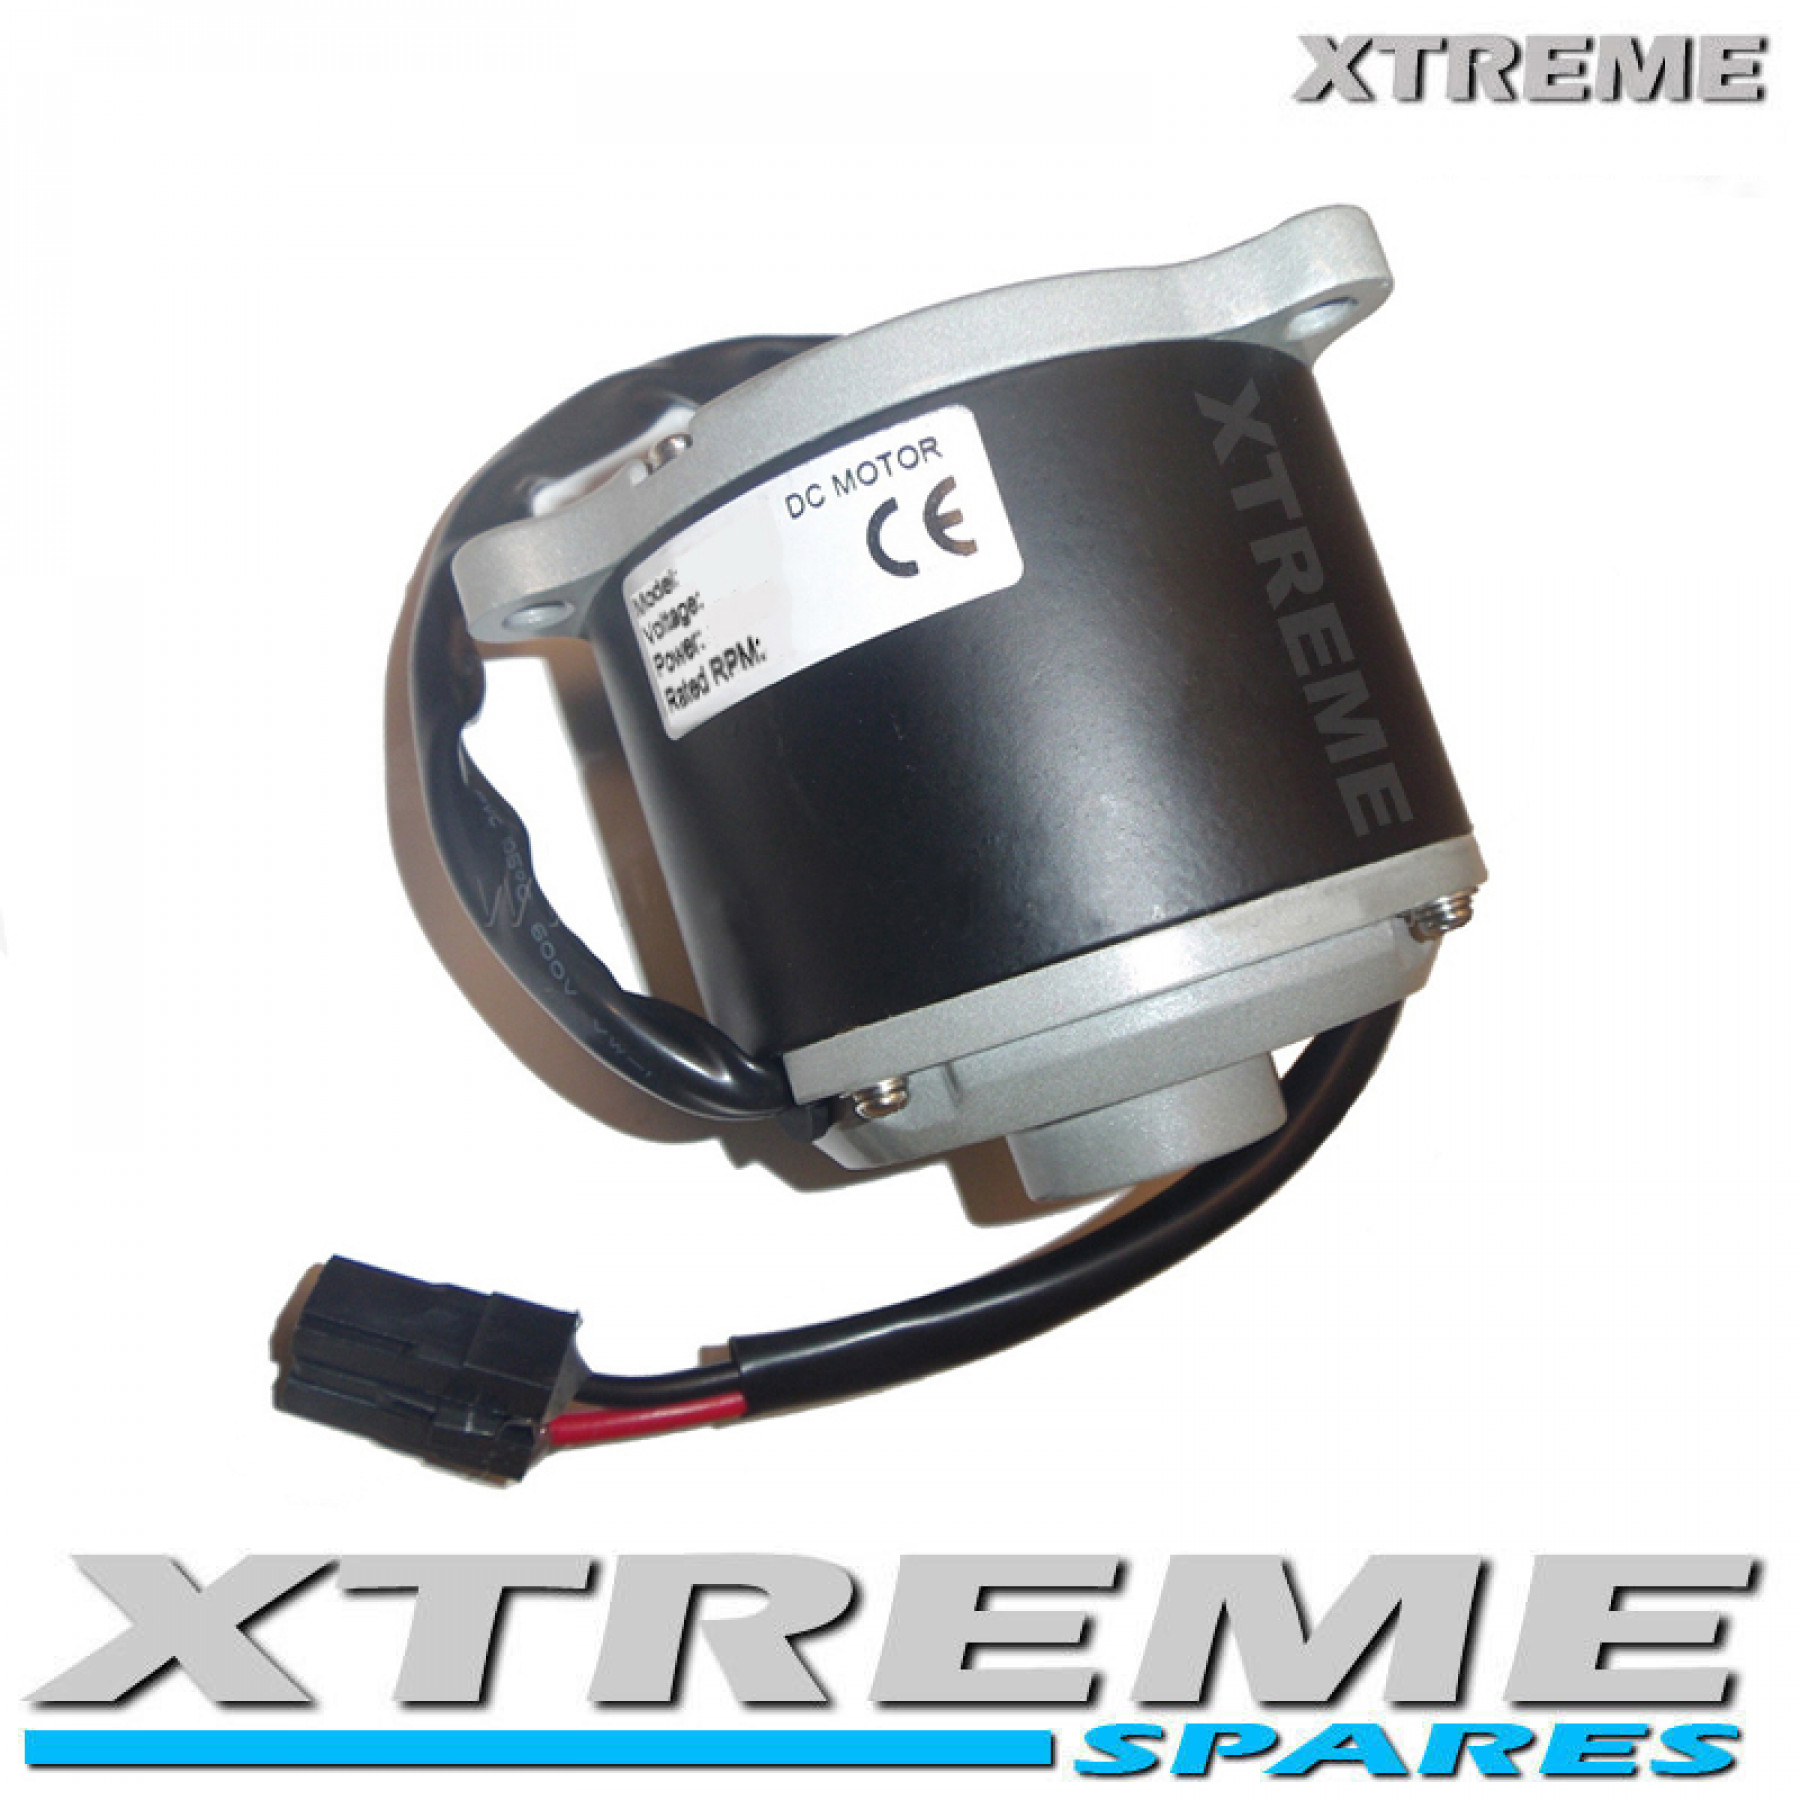 XTREME ELECTRIC XTM RACING 48V 1300W ELECTRIC MOTOR